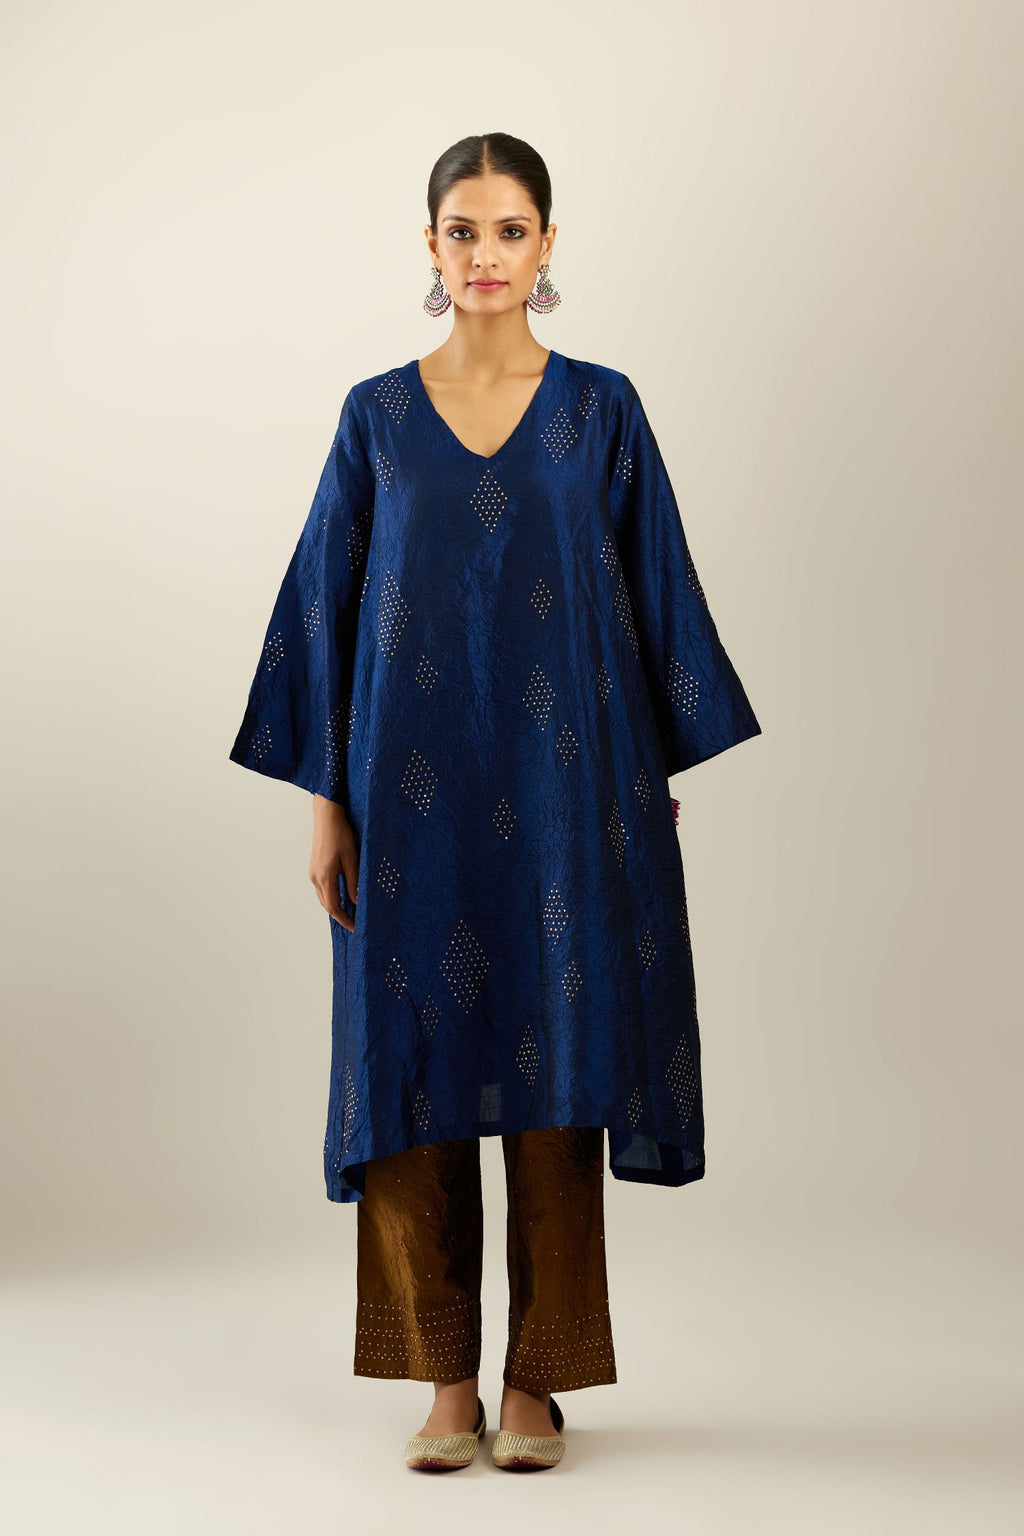 Navy blue silk hand crushed easy fit straight hem kurta, highlighted with all-over gold sequins in diamond shape, paired with golden olive hand crushed pure silk straight pants with gold sequins at hem in horizontal lines formation and side pockets.